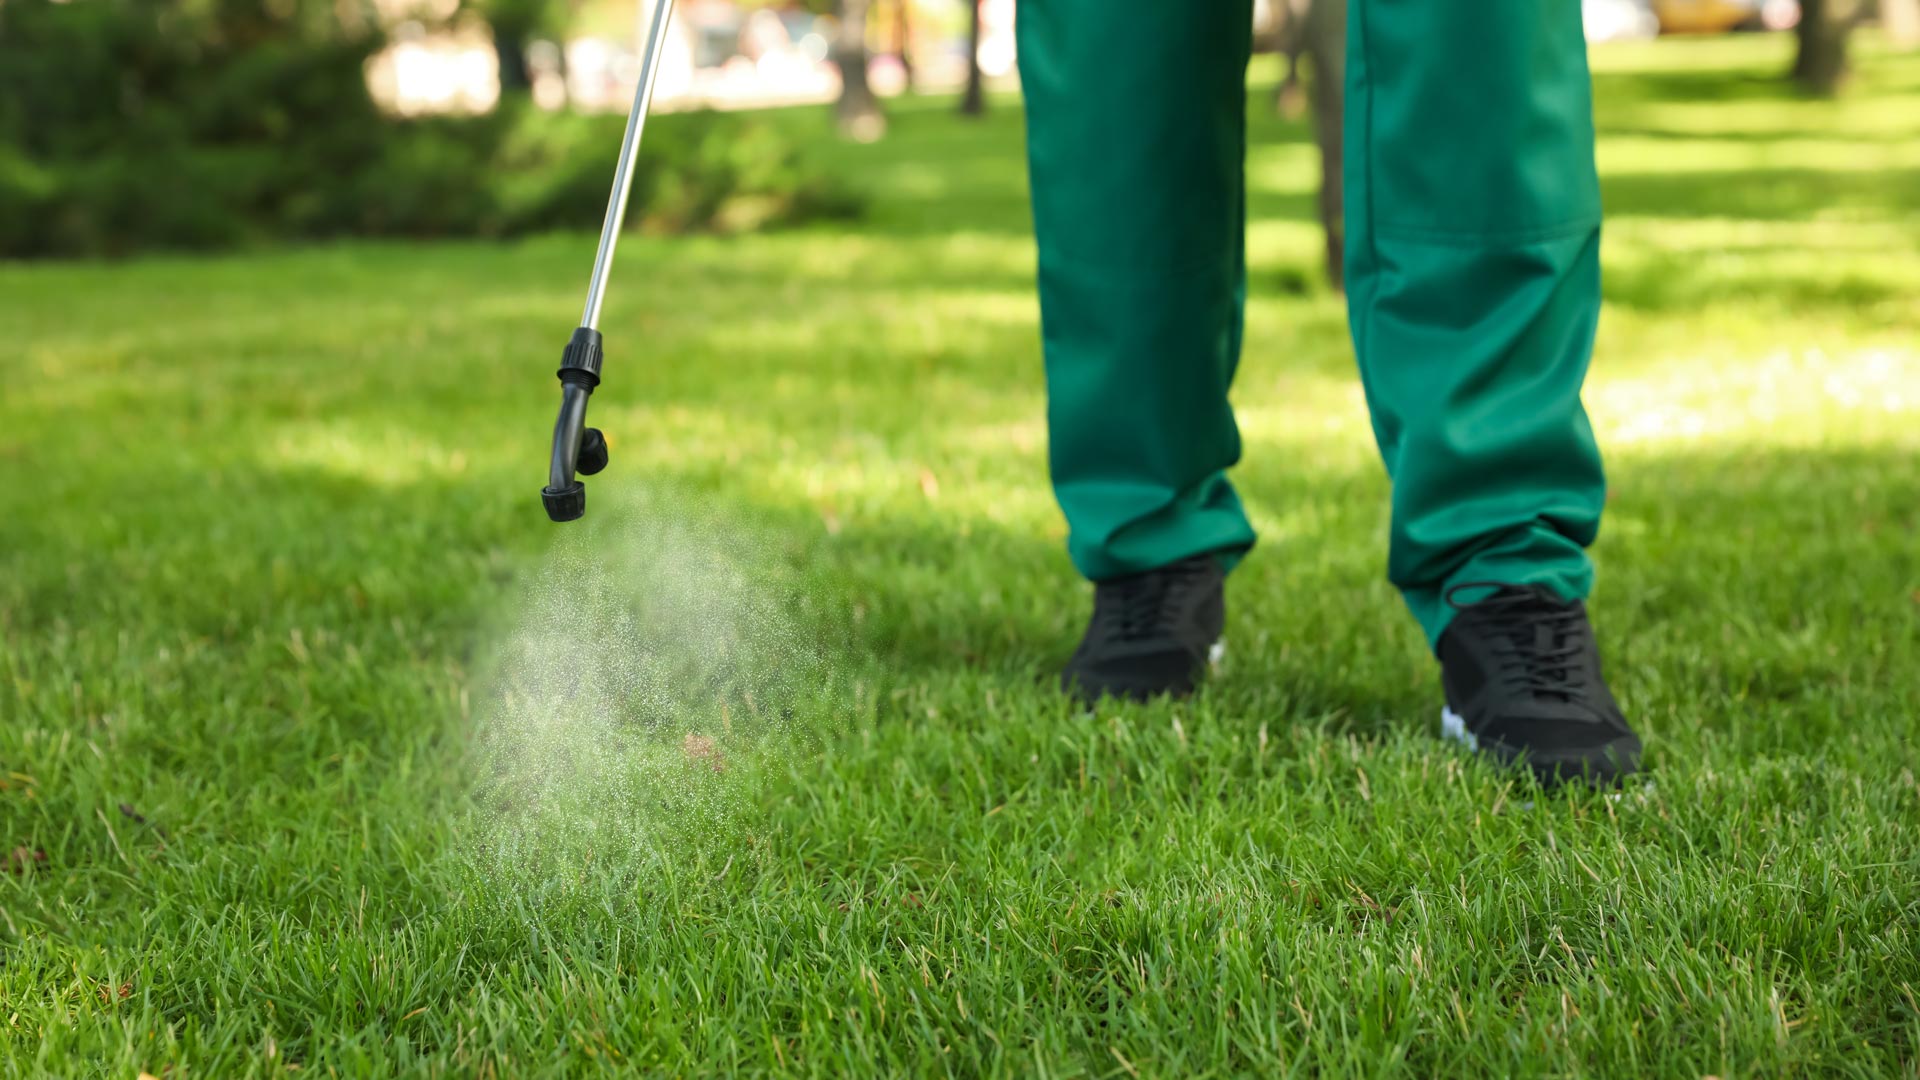 Pre-emergent Weed Control - What Is It & When Should You Apply It?